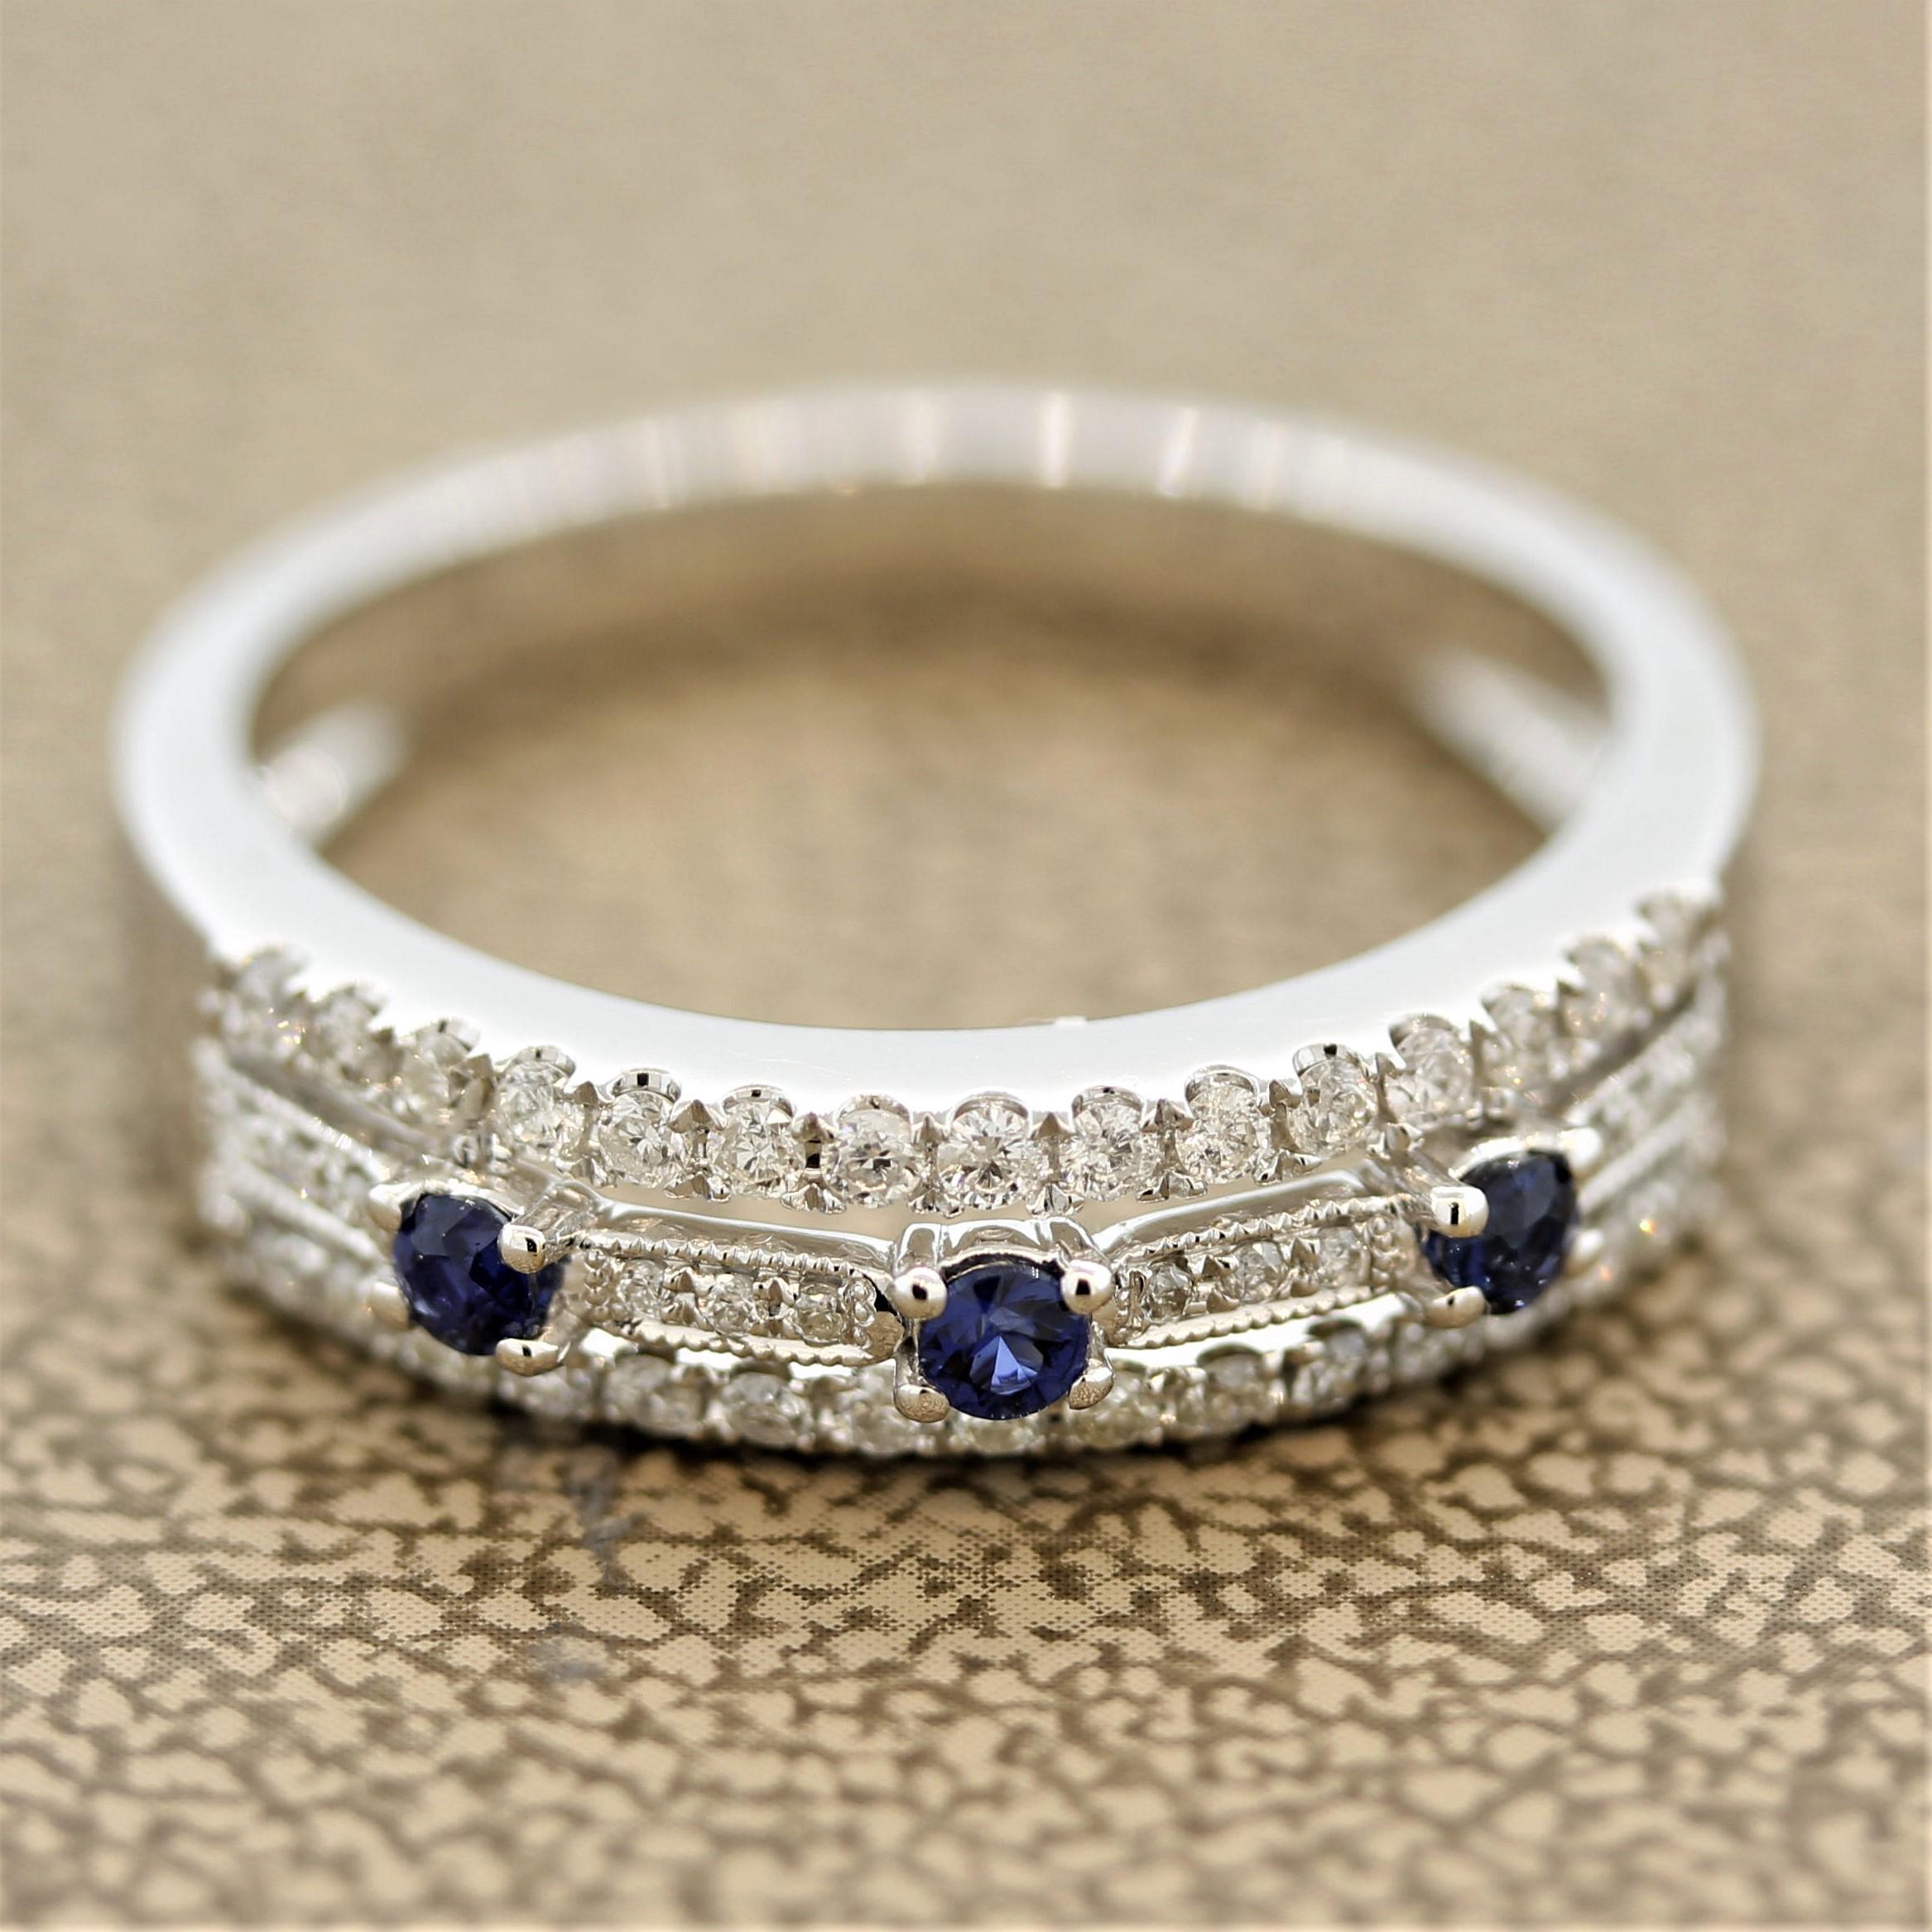 A lovely piece that can be worn every day. It features 3 round cut sapphires weighing 0.15 carats along with 0.30 carats of round brilliant cut diamonds. Made in 14k white gold with open goldwork and millgrain finish on the center.

Ring Size 7